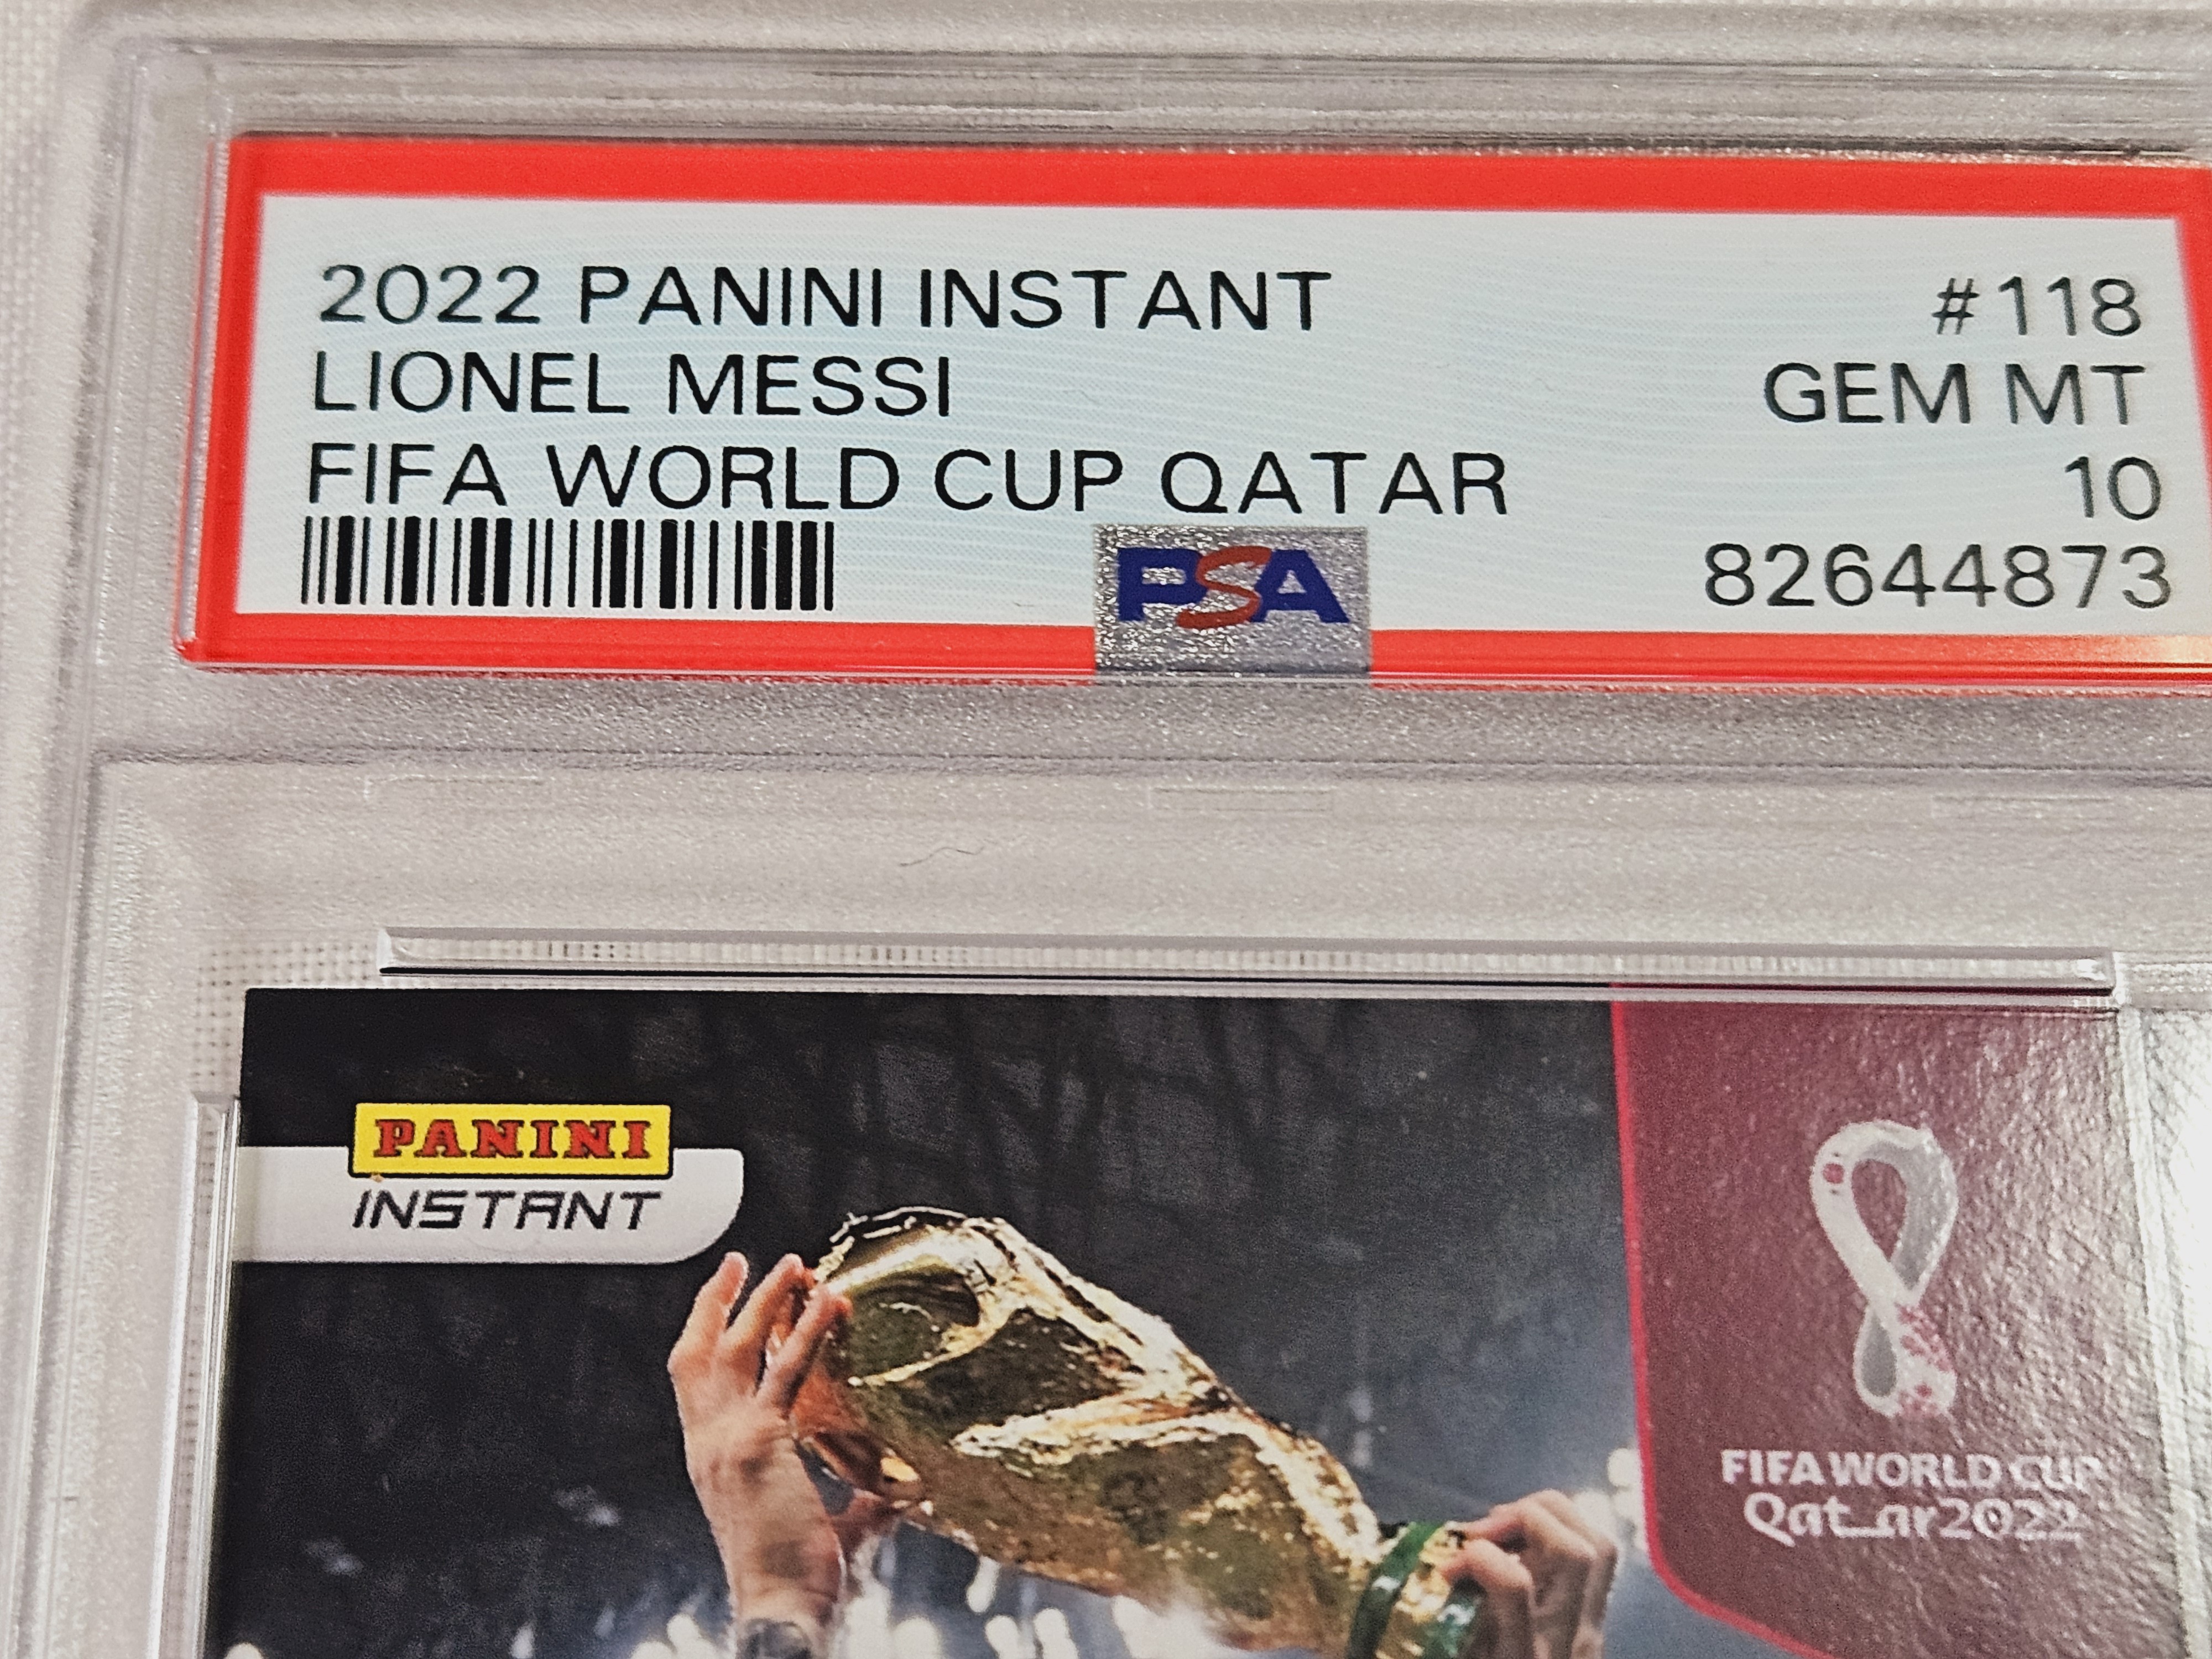 2022 - Panini - Instant World Cup - Lionel Messi - #118 - 1 Graded